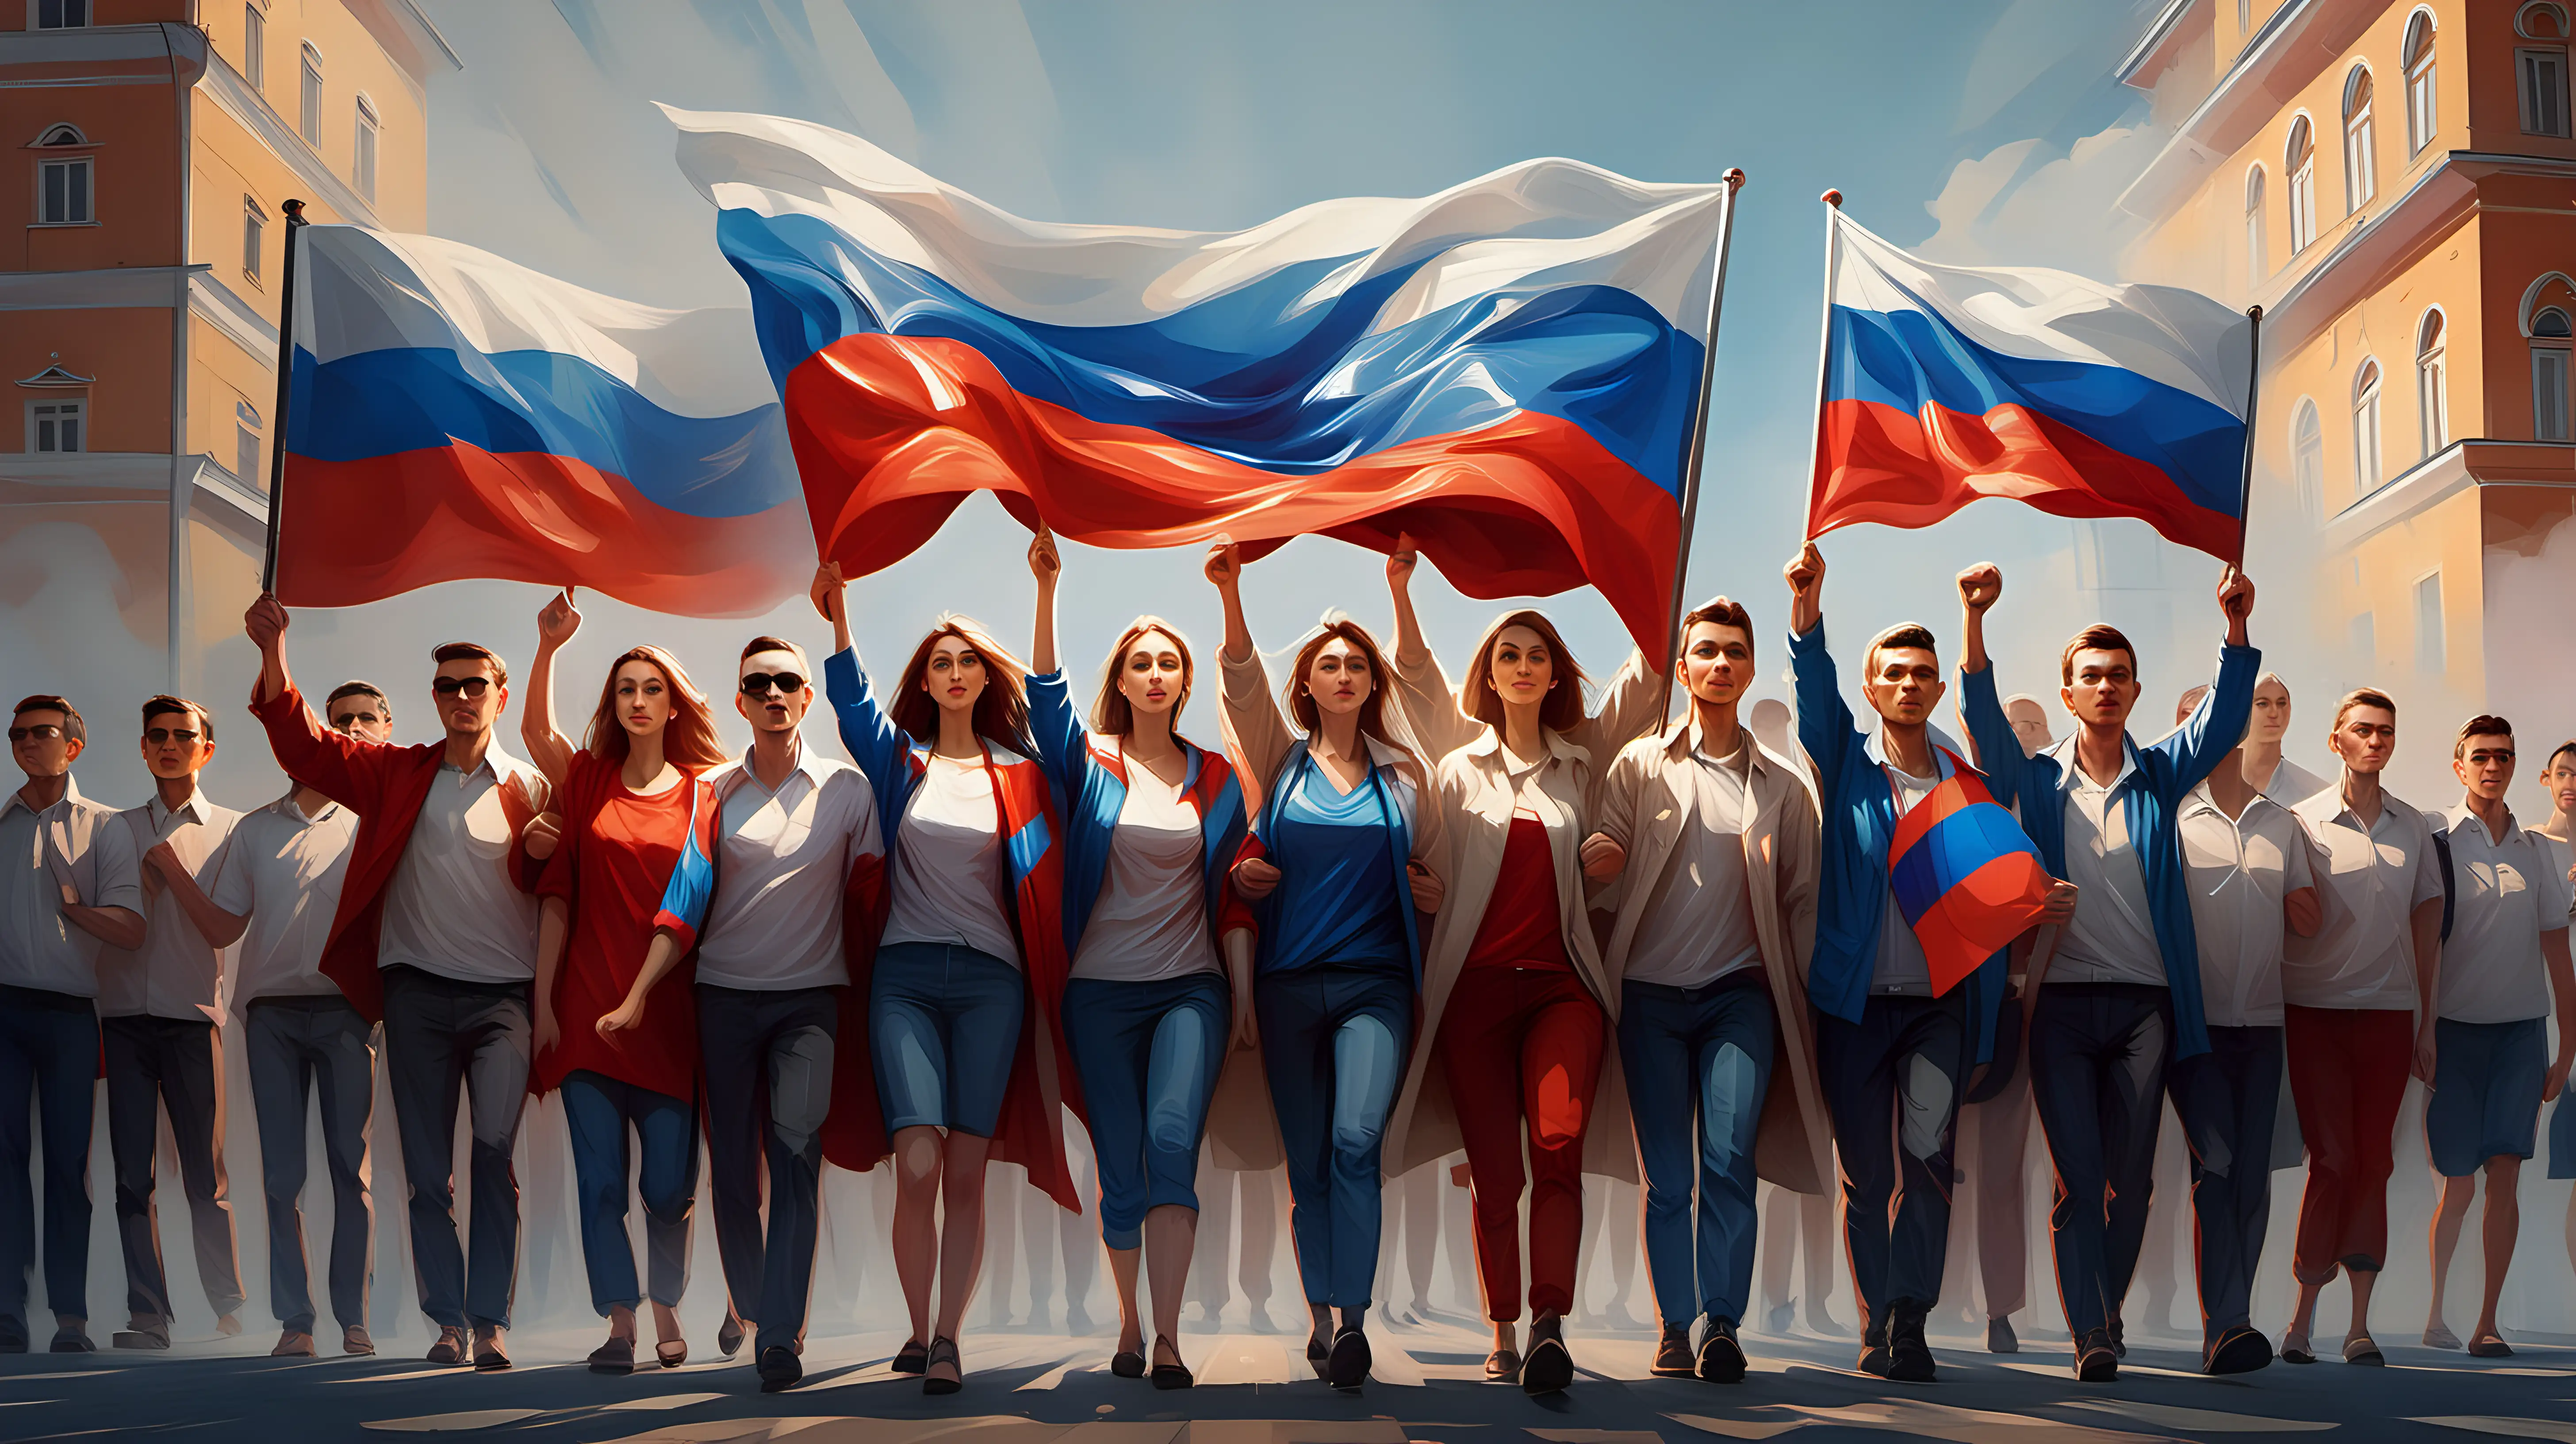 Unified Group Holding Russian Flag in Patriotic Display